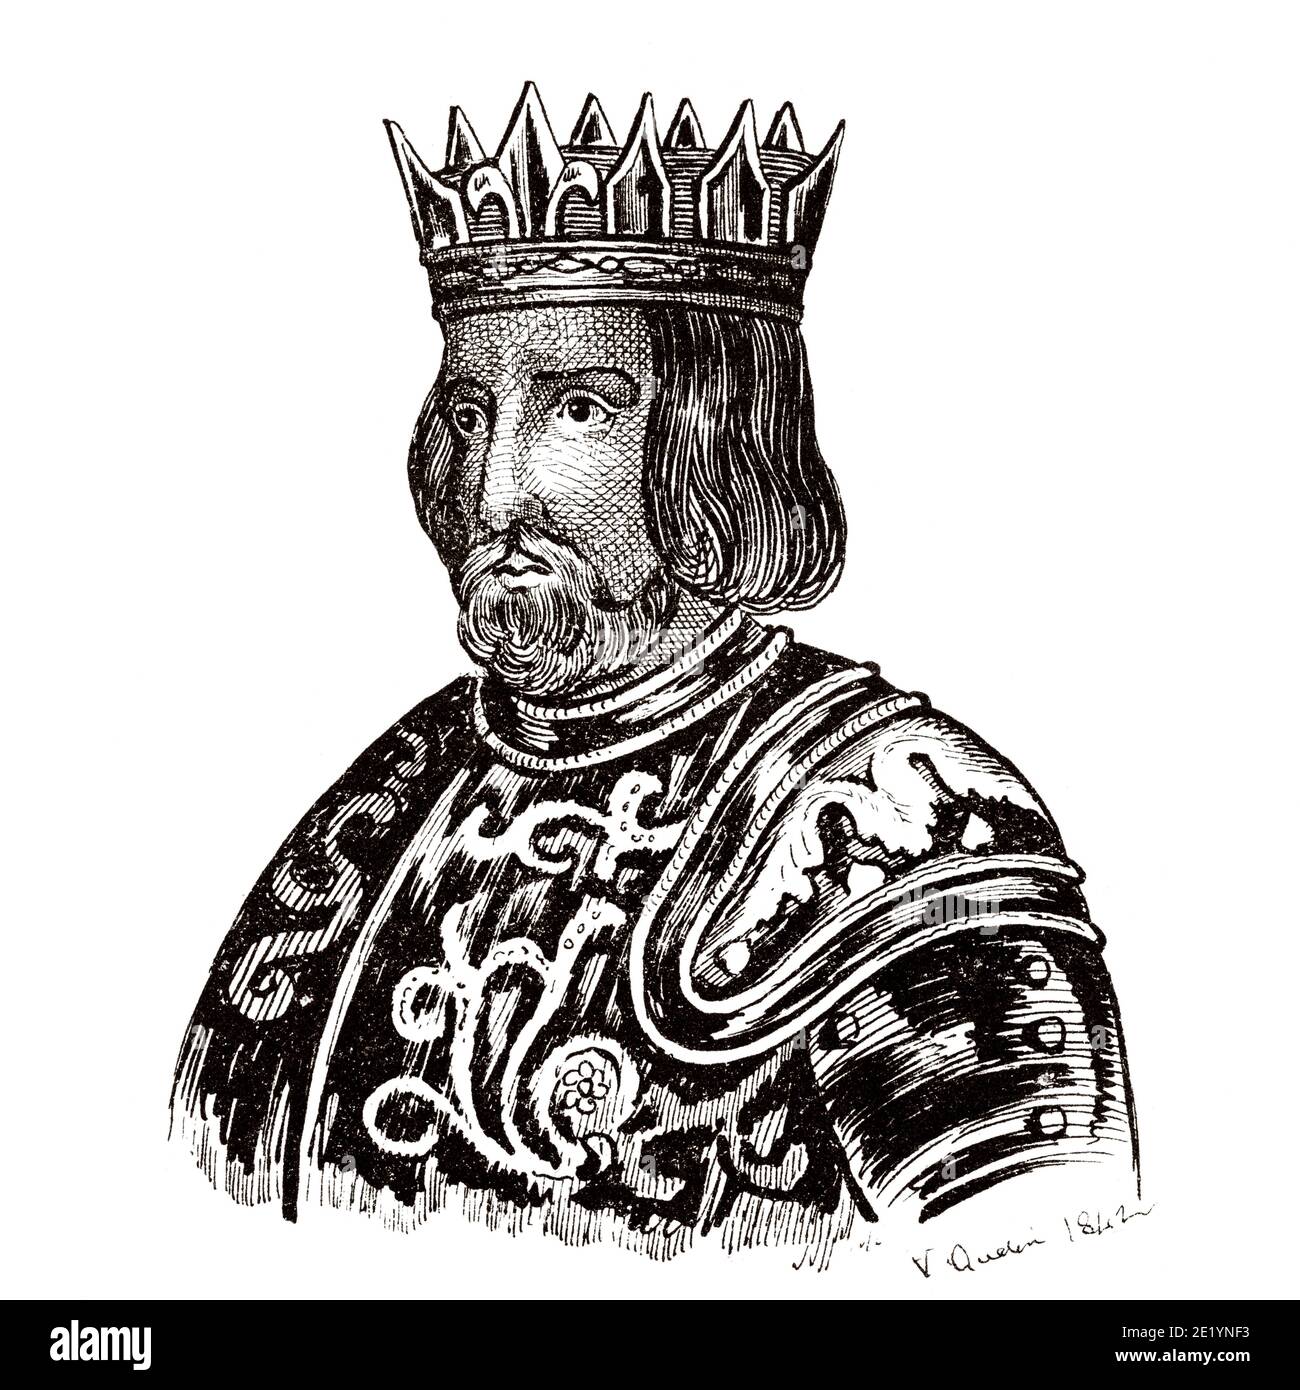 Portrait of Jean the Good (1319 - 1364). King of France from 1350 to 1364. House of Valois. History of France, from the book Atlas de la France 1842 Stock Photo